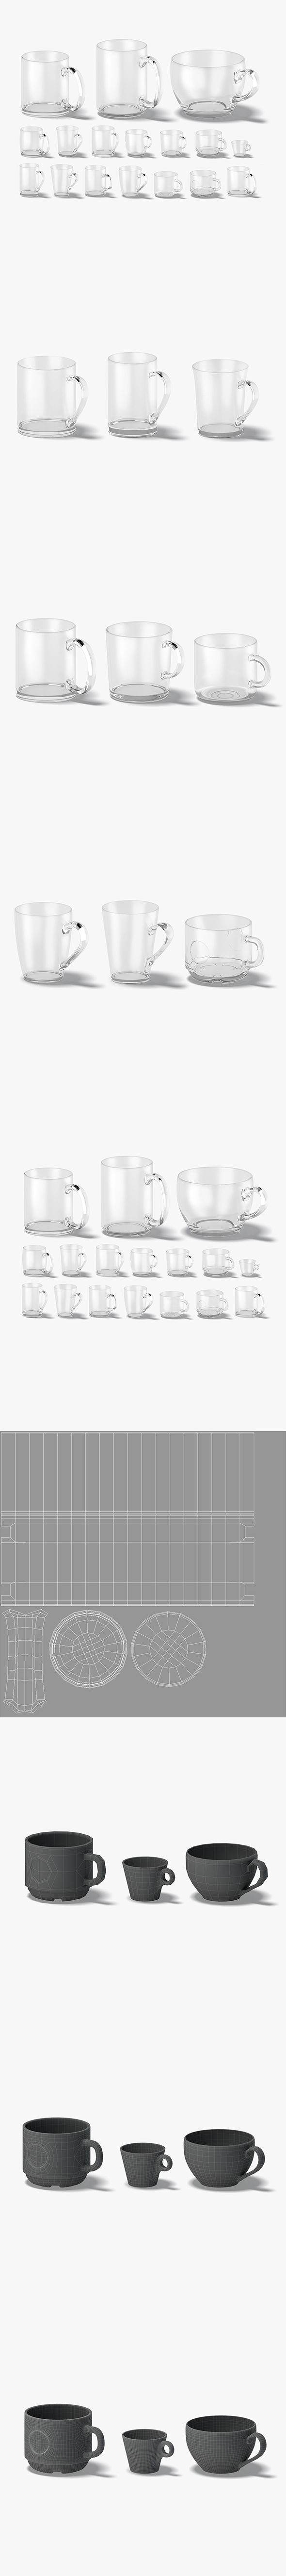 18 Glass Mug Shapes - transparent cups with different forms and sizes